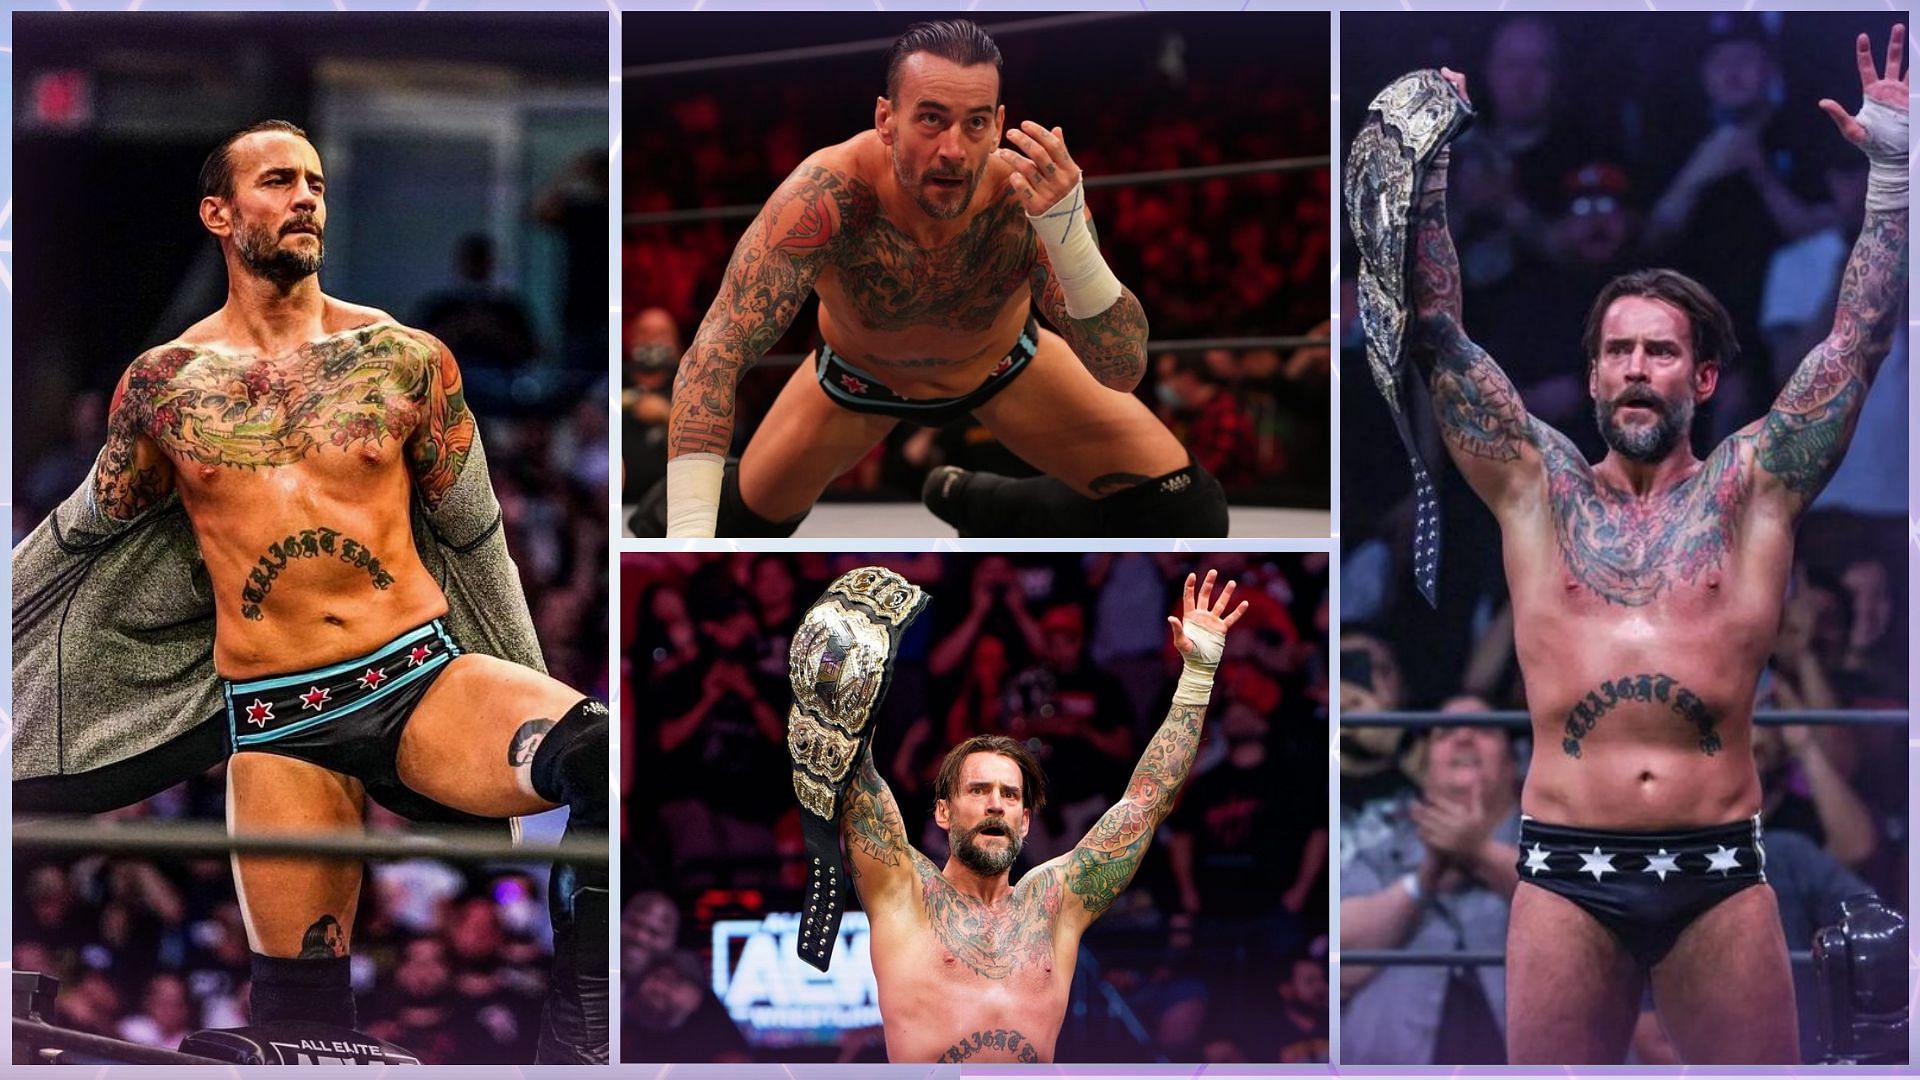 CM Punk also paid a visit to other promotions.